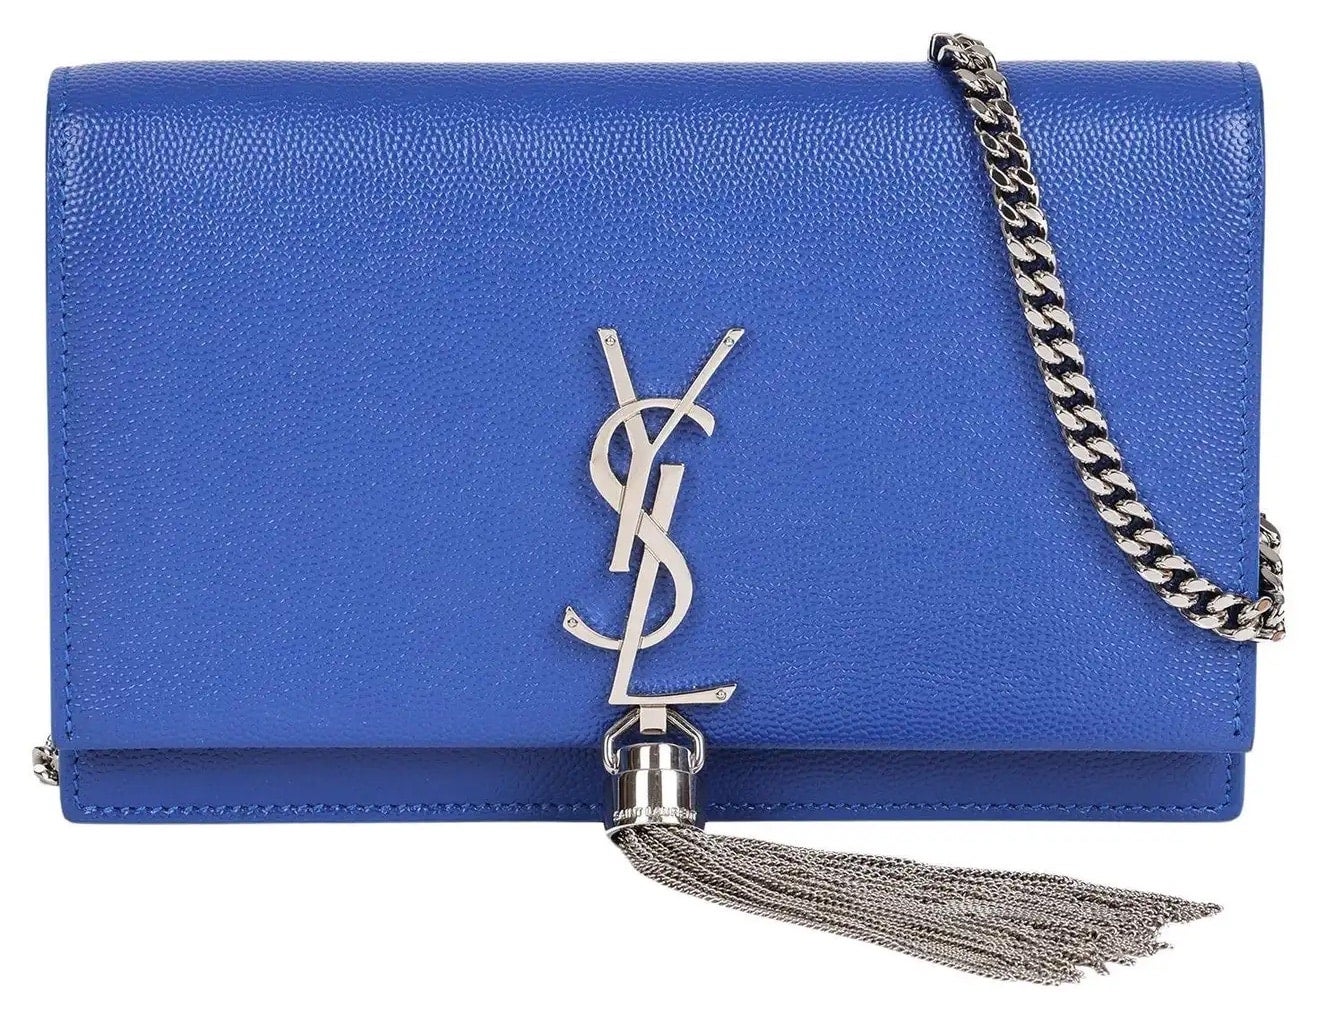 How Do You Authenticate and Care for an Yves Saint Laurent Handbag?